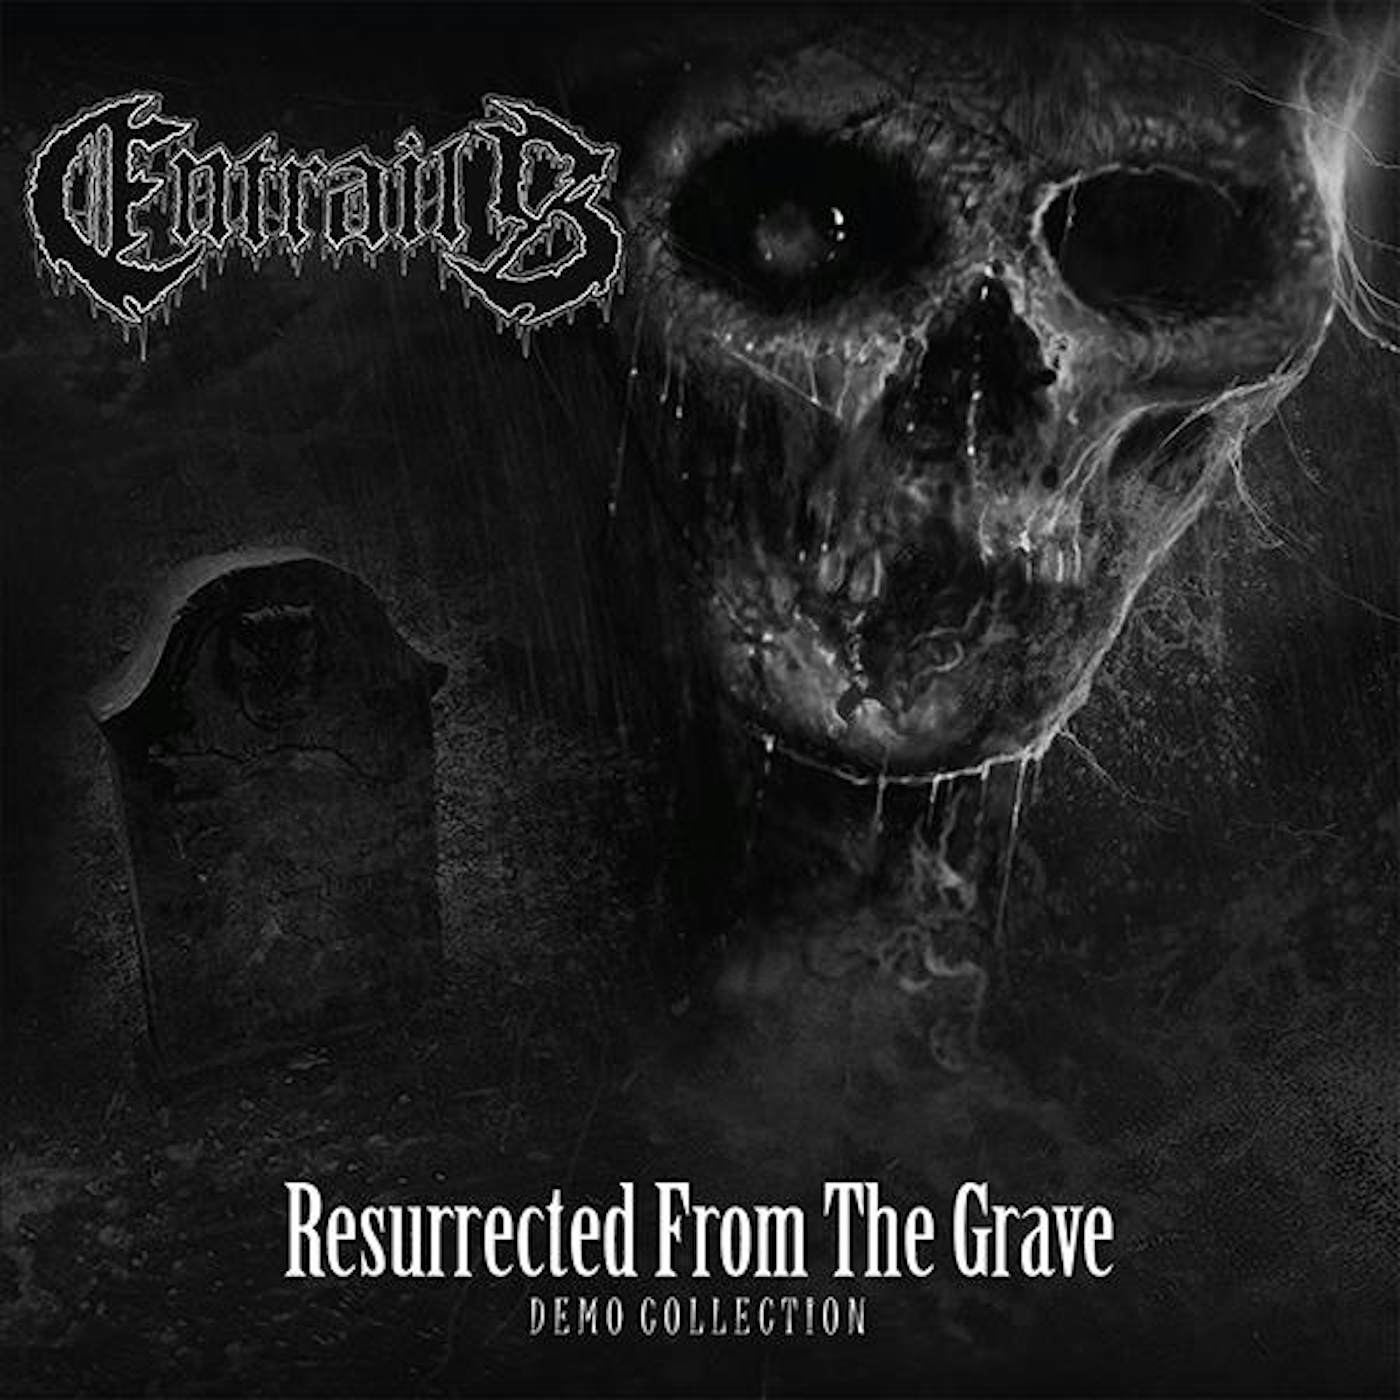 Entrails "Resurrected from the Grave (Demo Collection)" CD